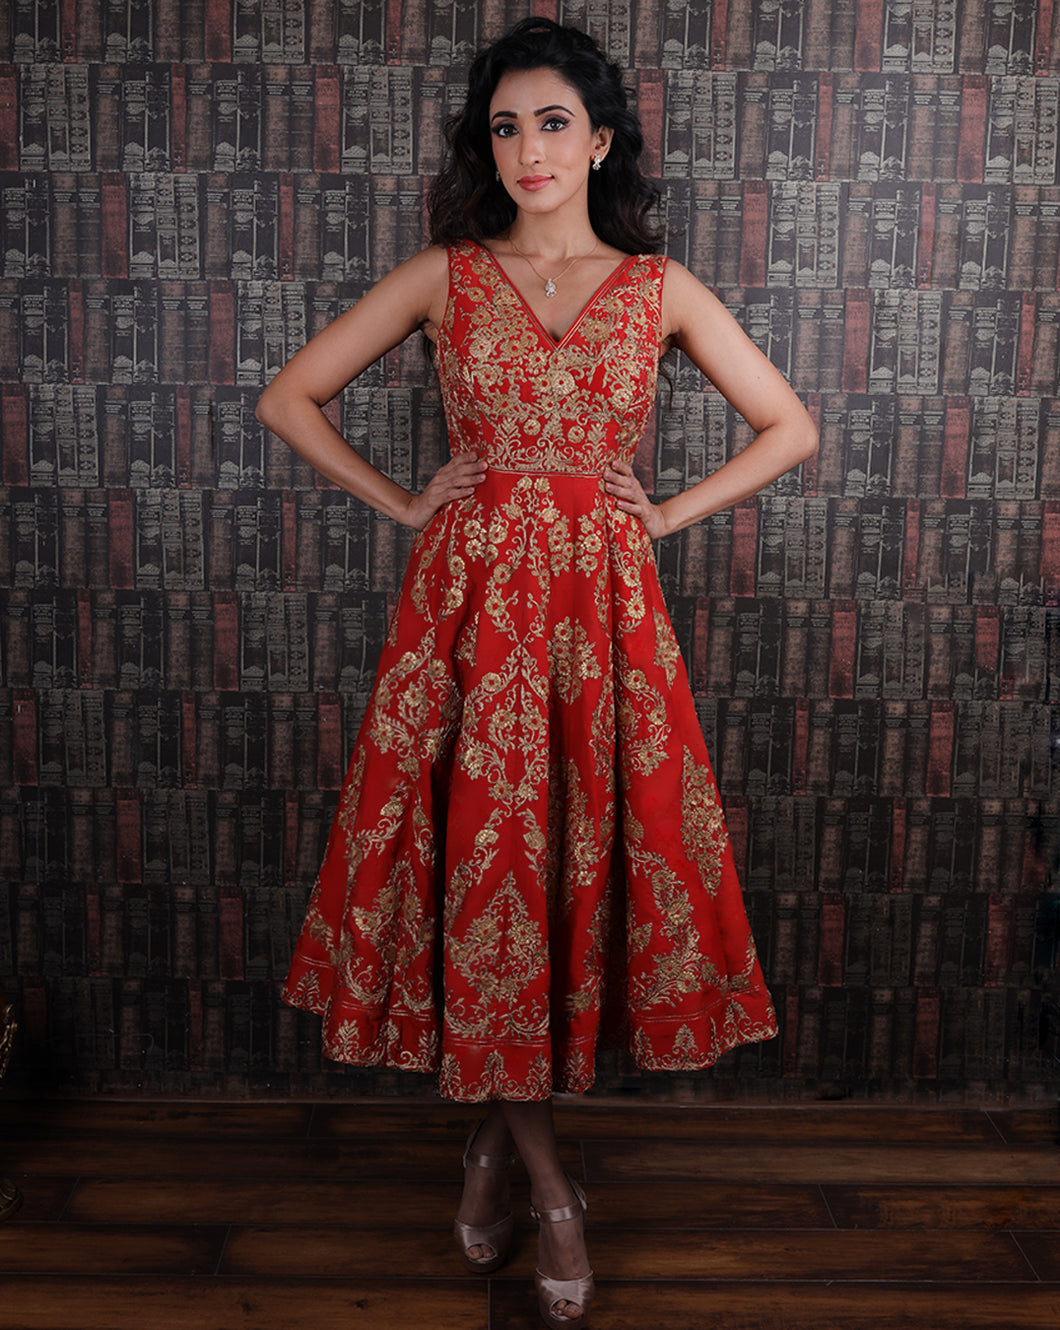 The Red Embroidered Dress